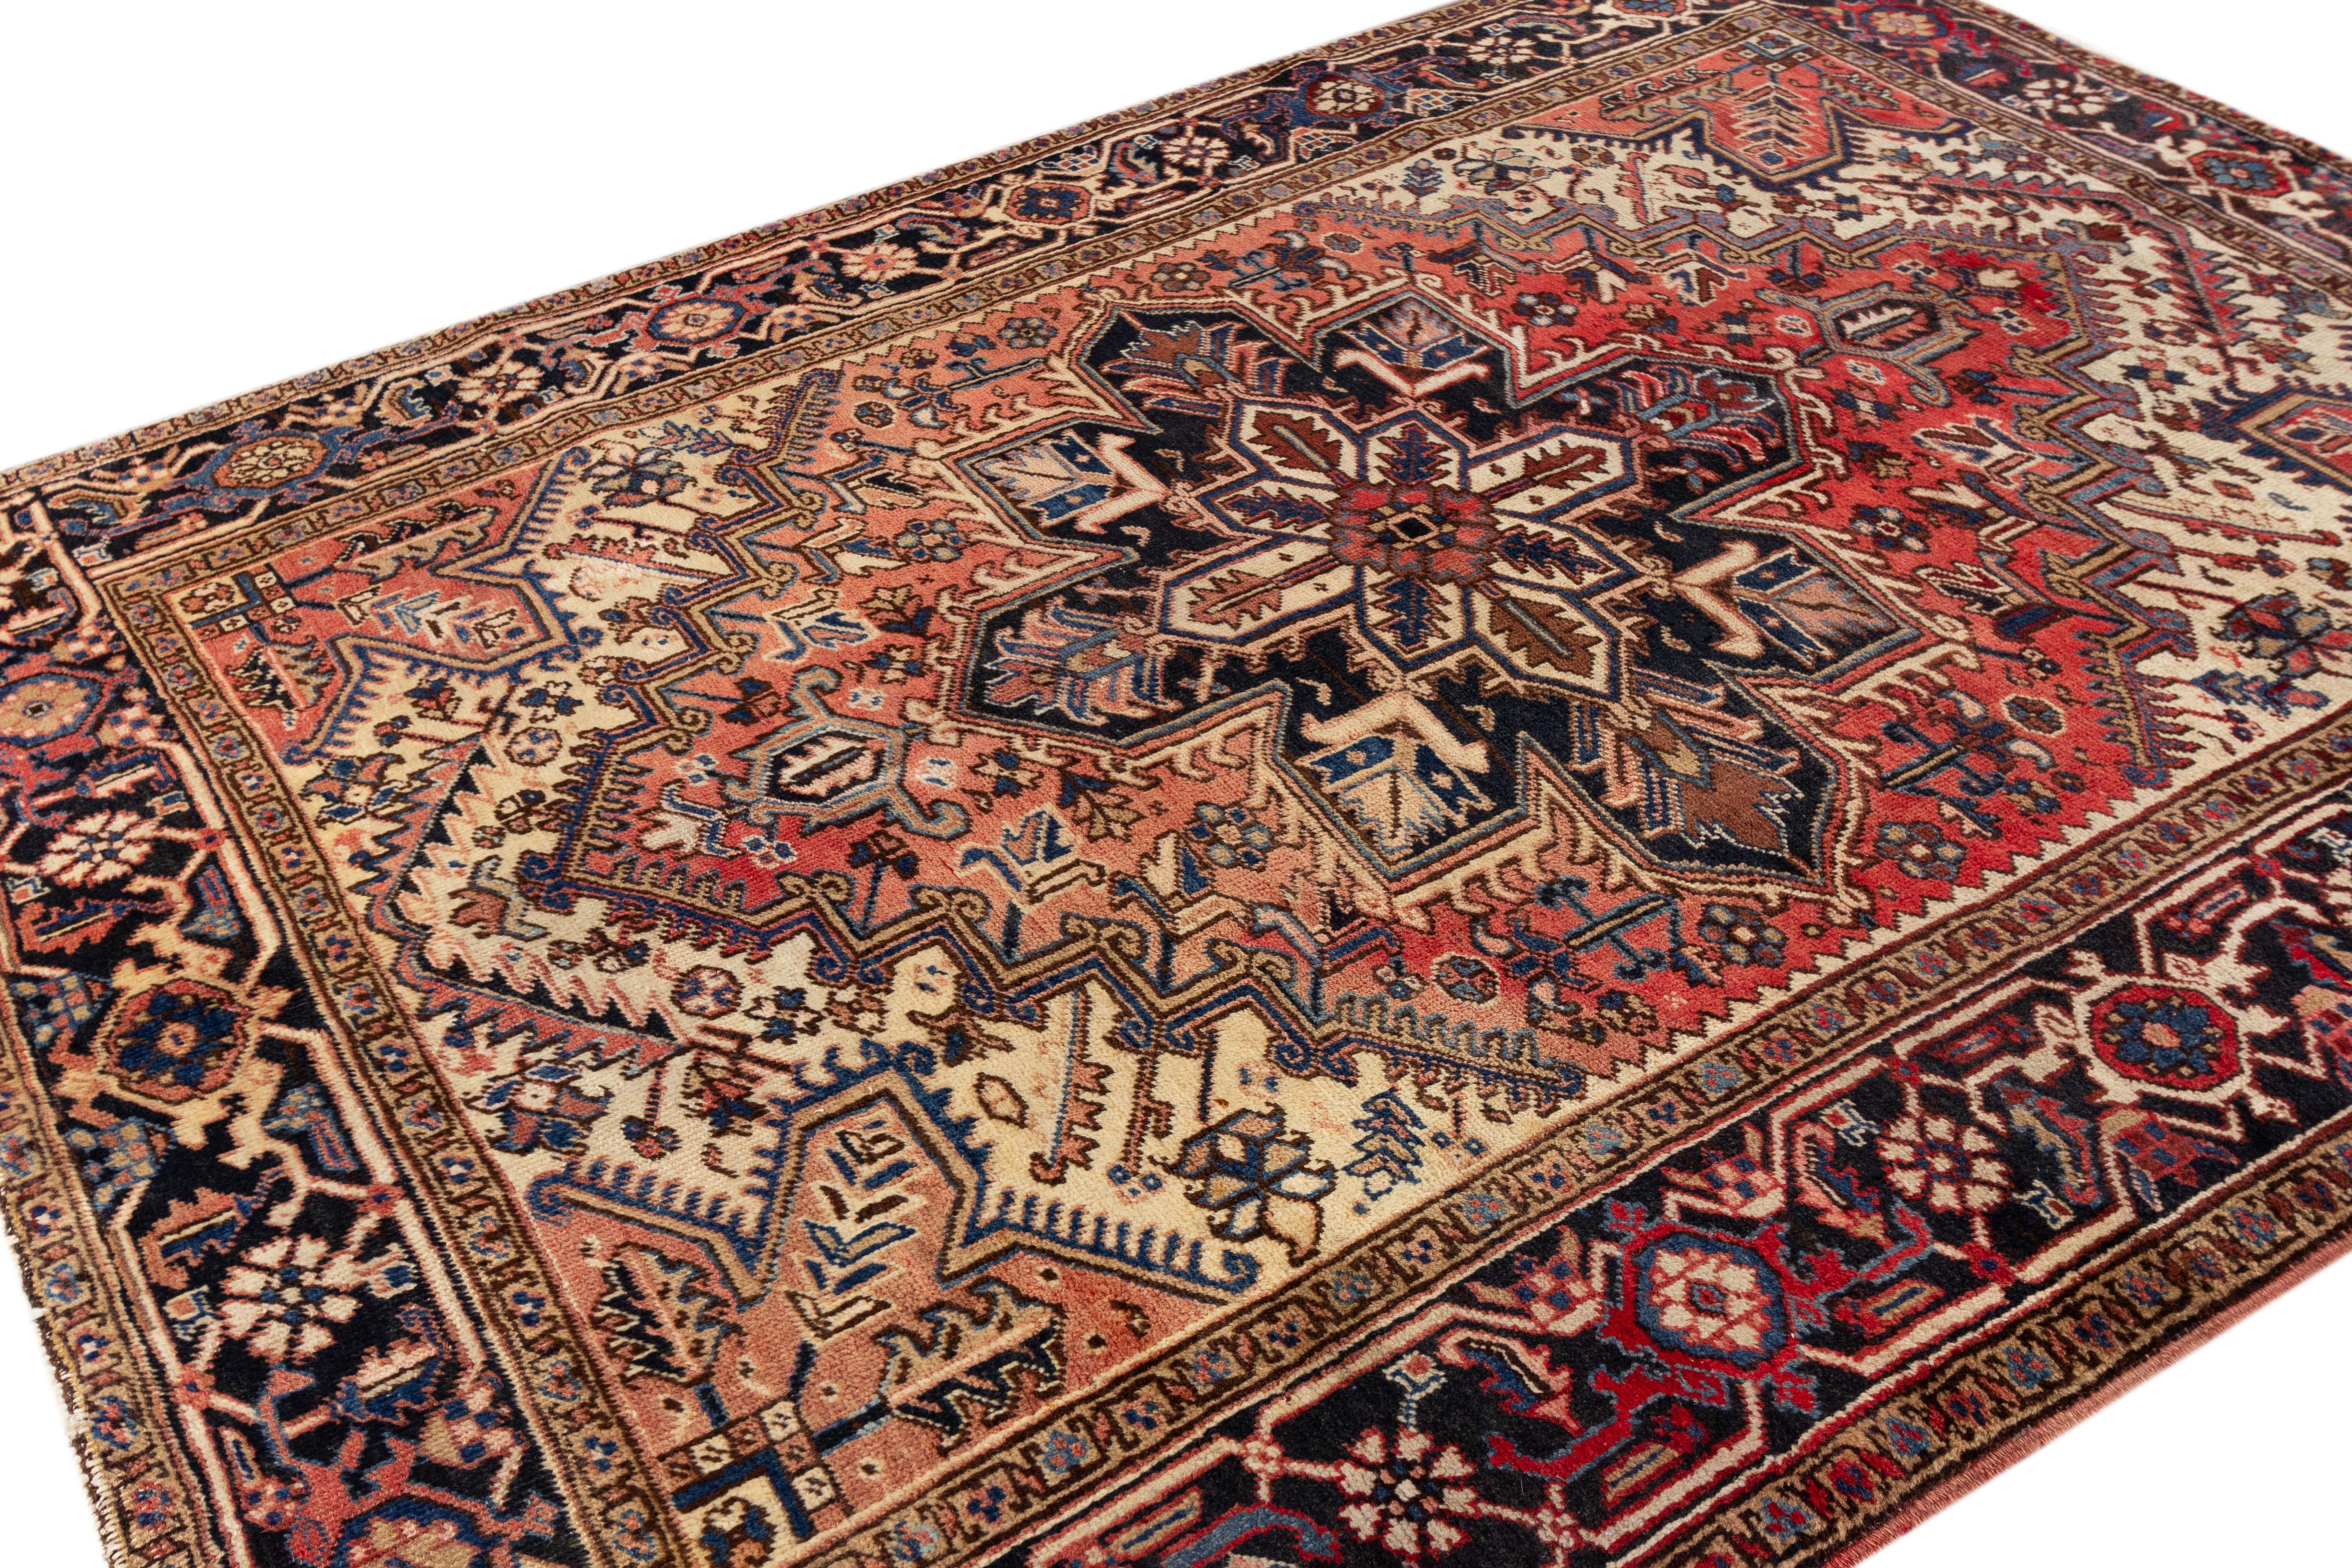 This antique Heriz rug with hand-knotted wool and a remarkable medallion design. The intricate floral motifs in shades of blue and brown, accentuating the soft red field, lend an alluring touch, making it a splendid work of Persian artistry.

This